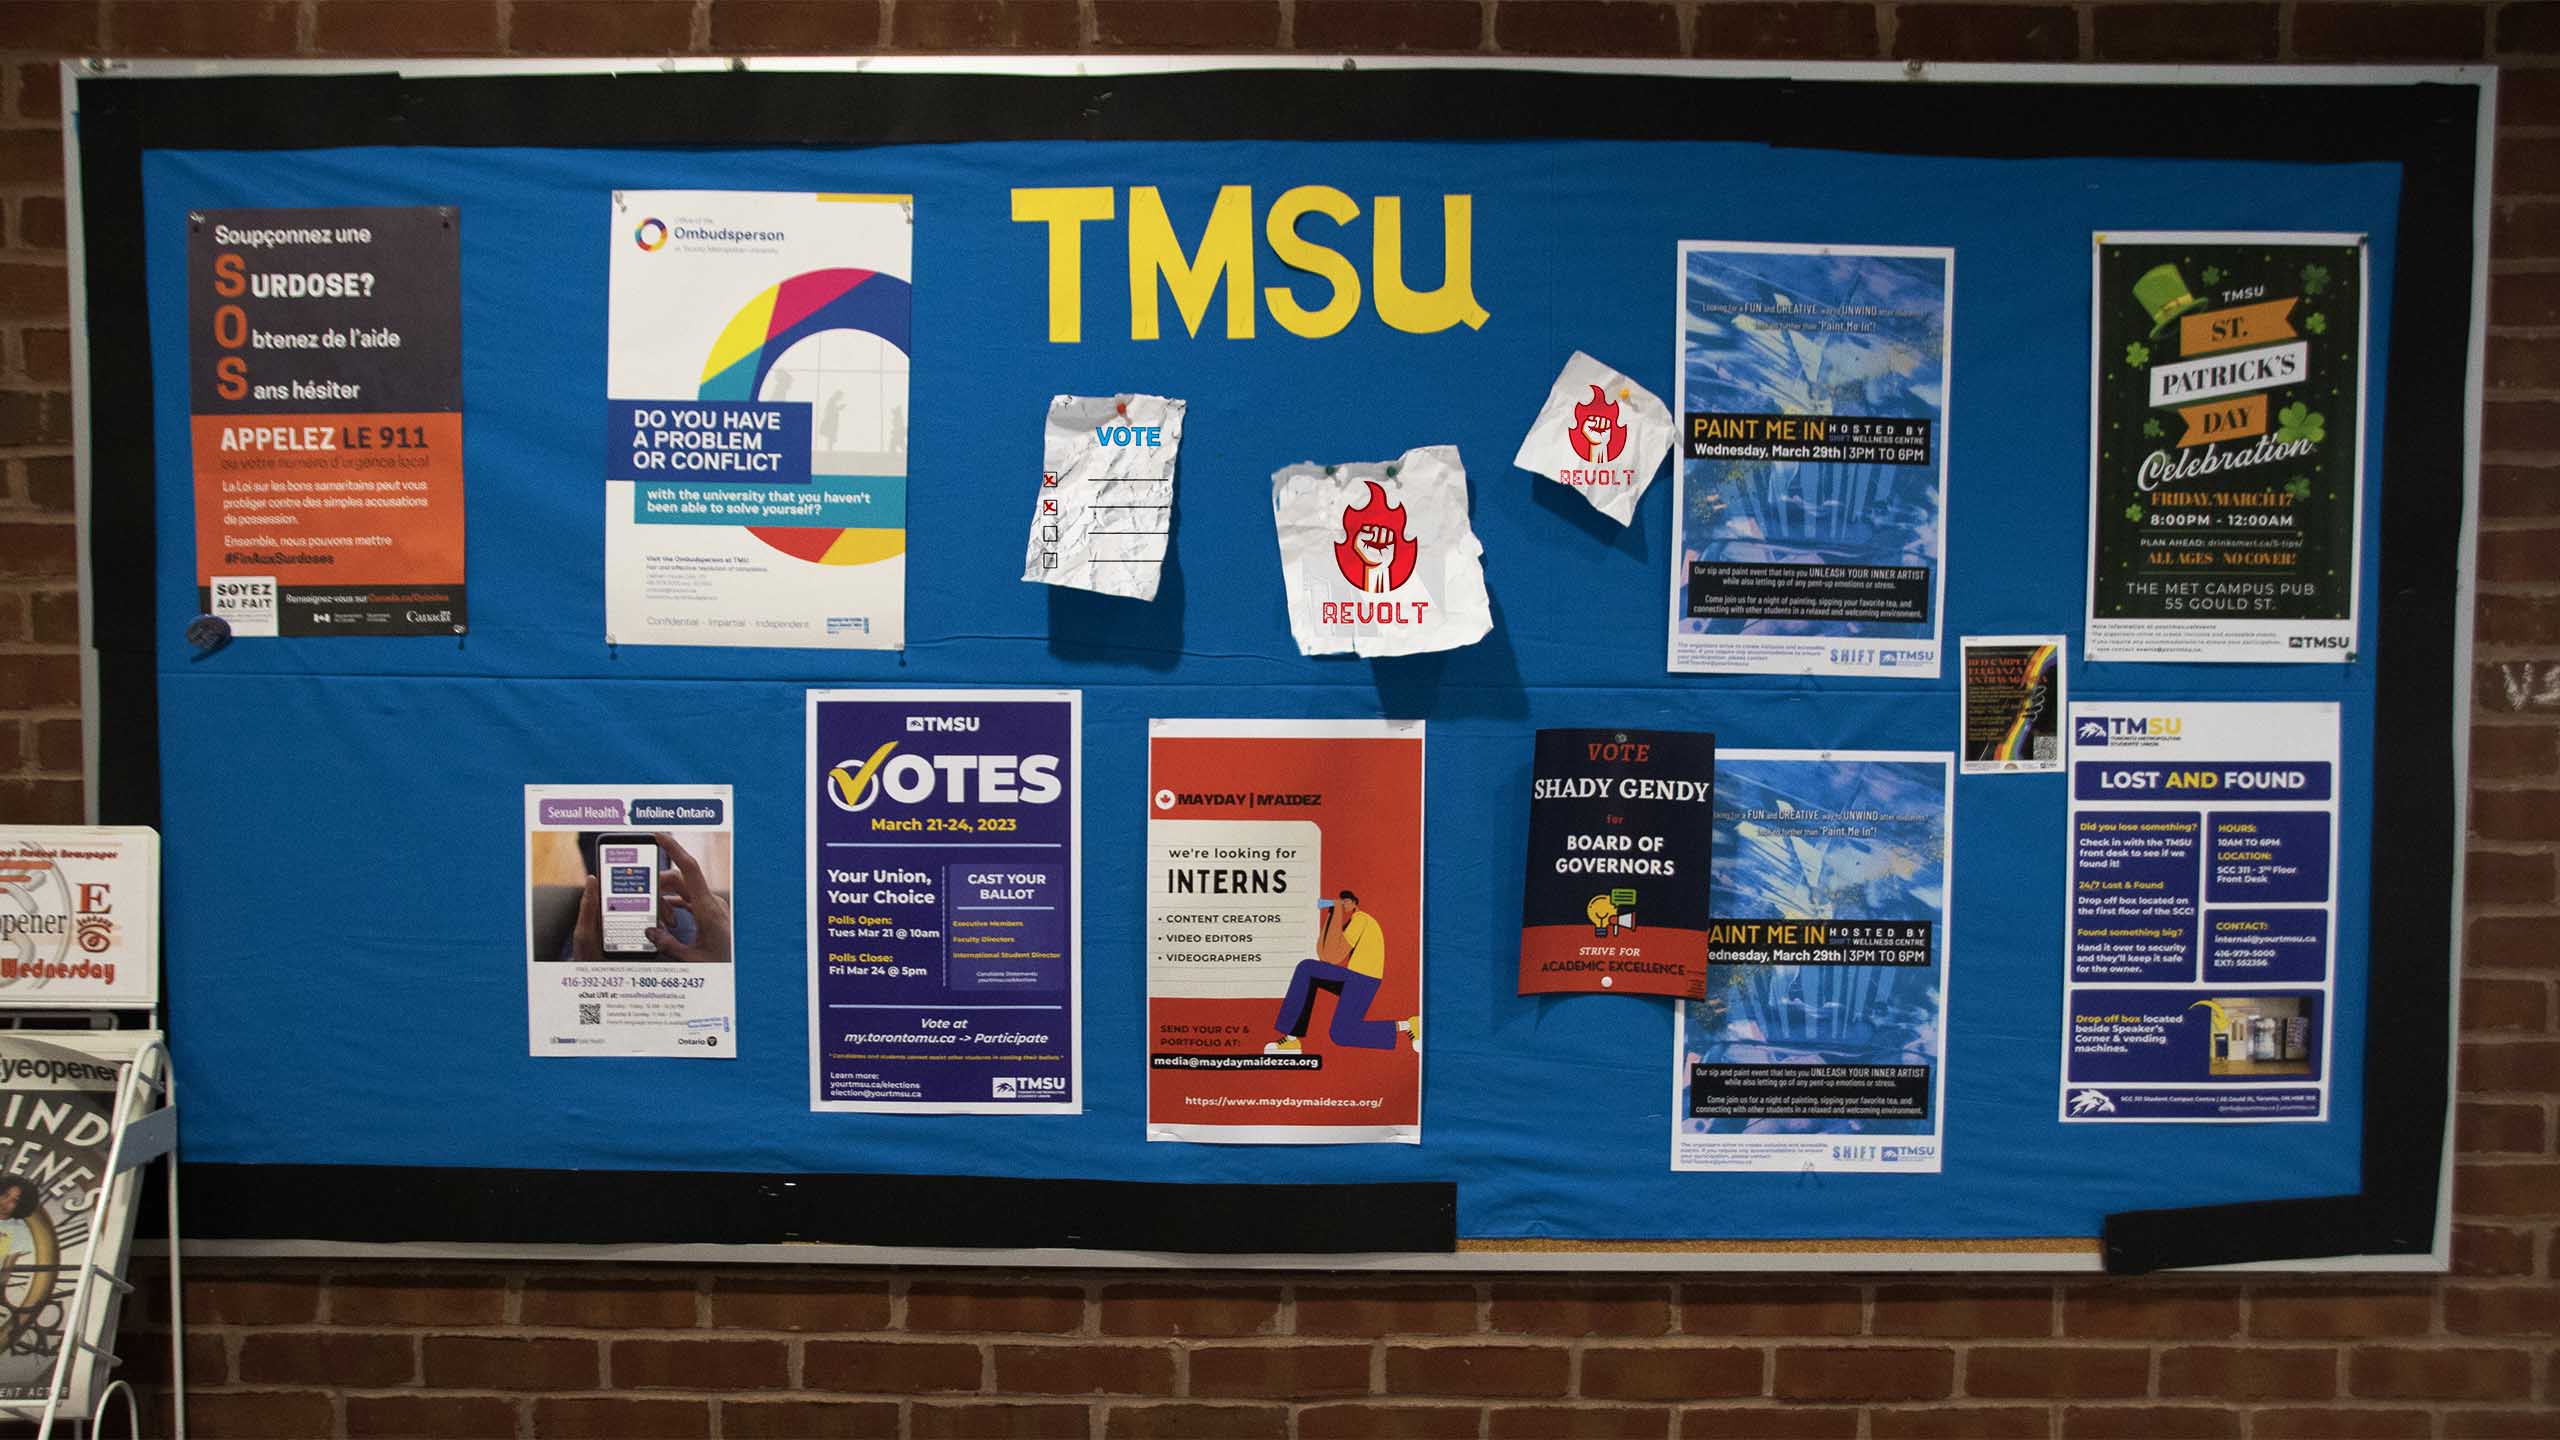 Bulletin board with "TMSU" spelt out and a variety of posters